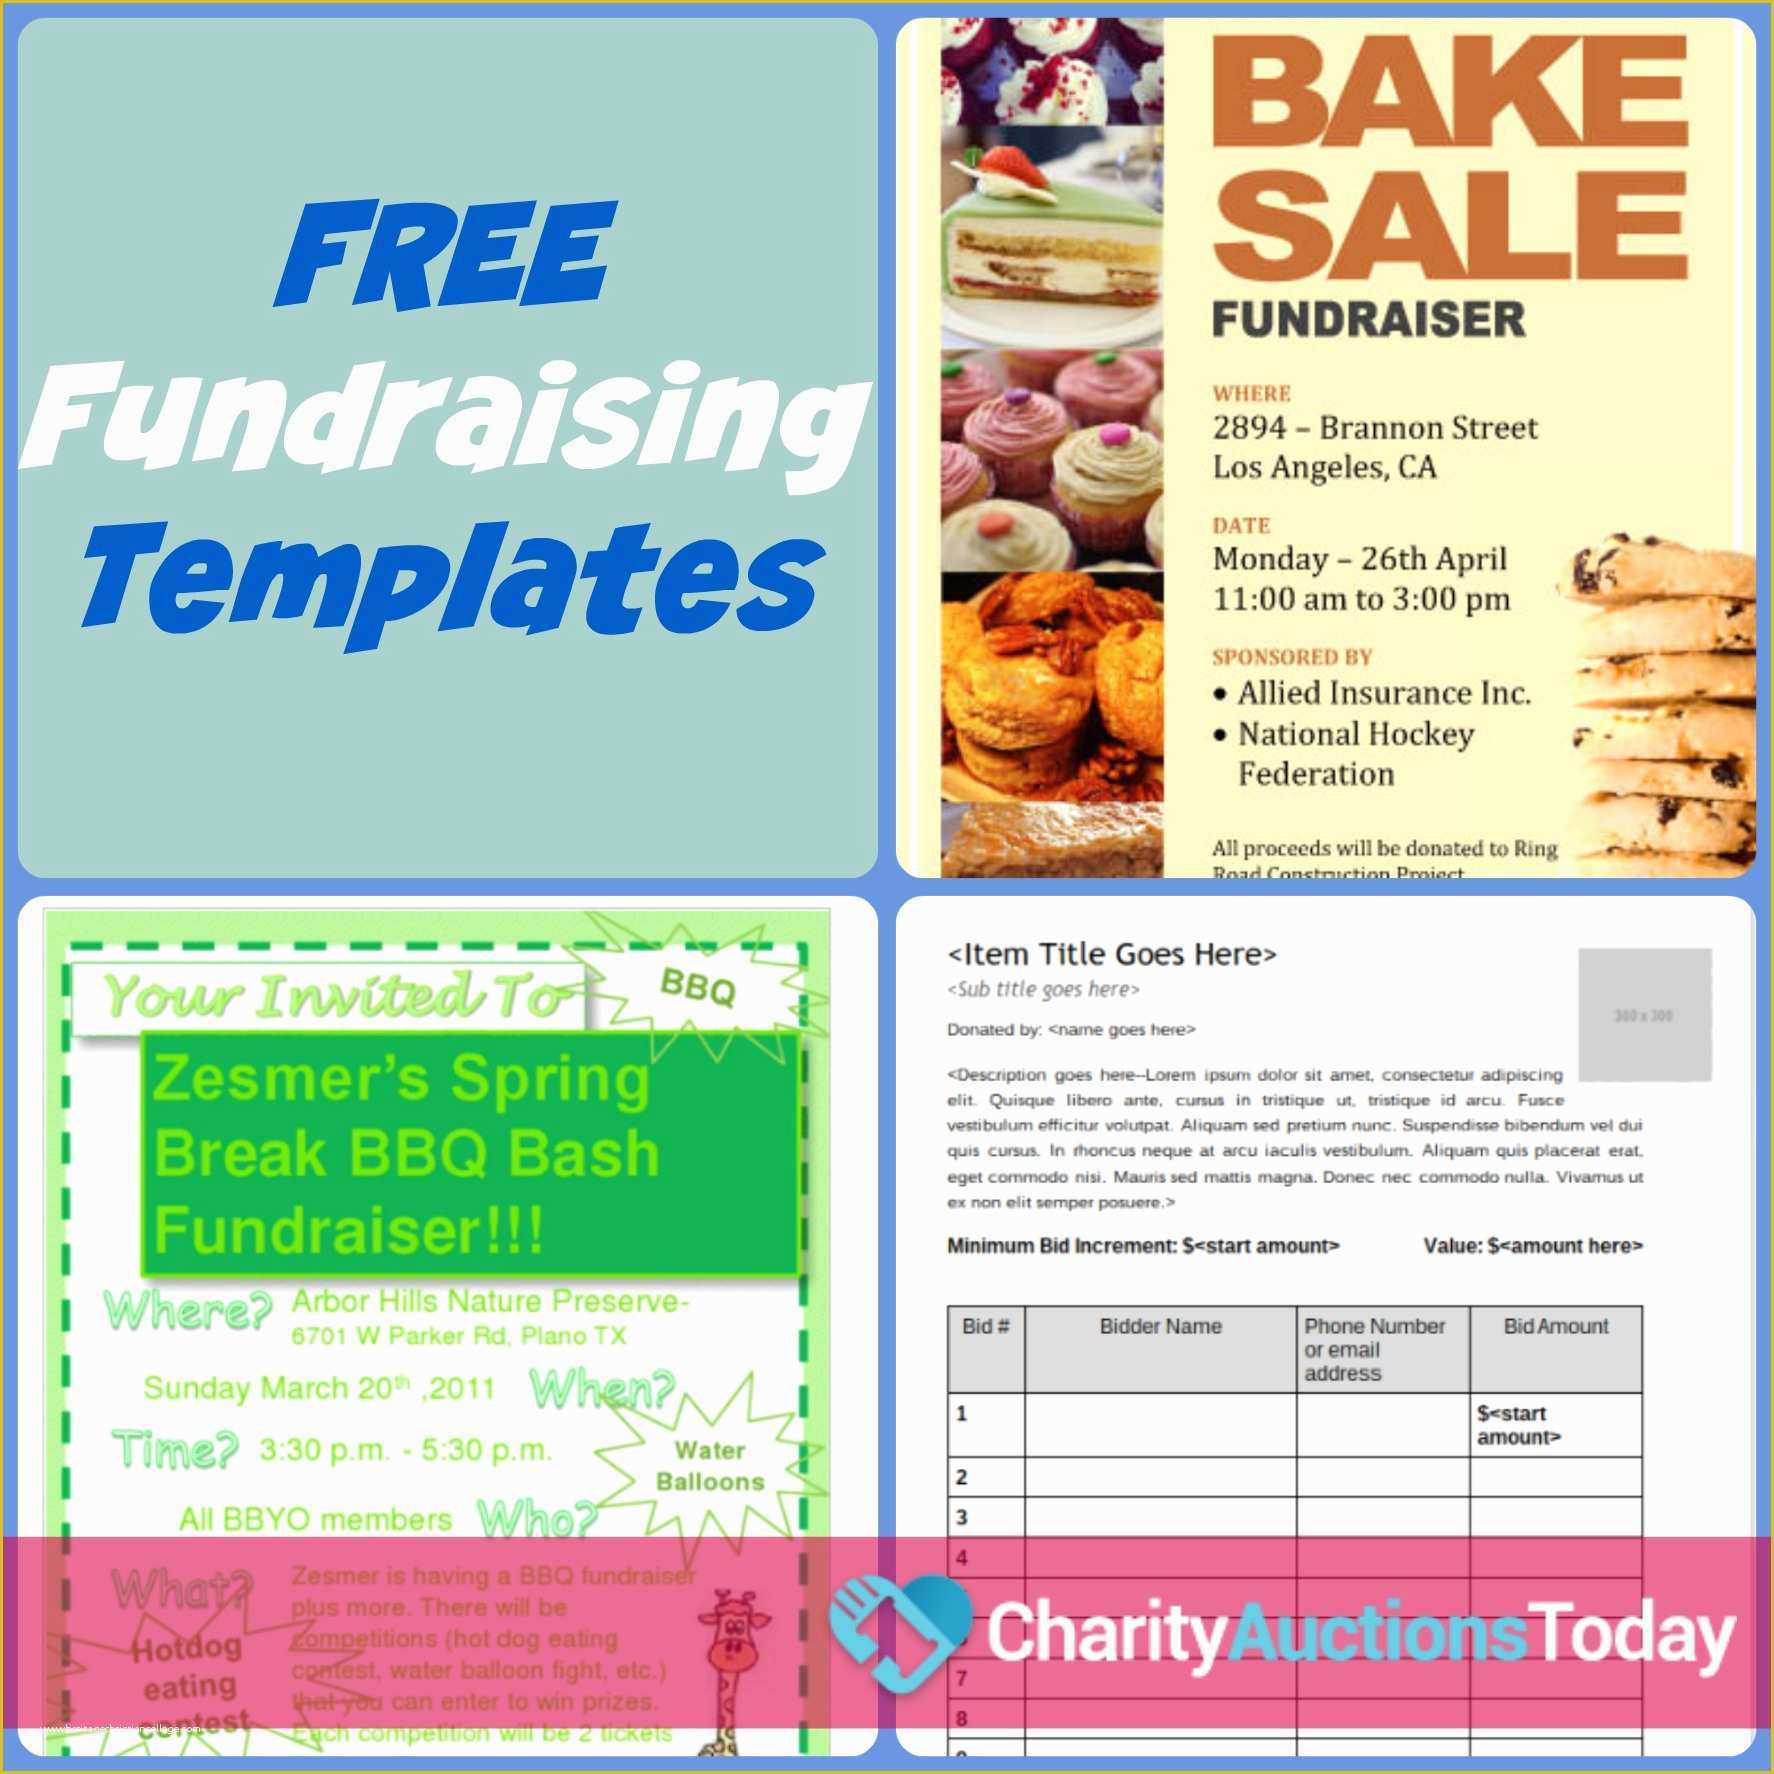 Free Print Ad Templates Of Free Fundraiser Flyer